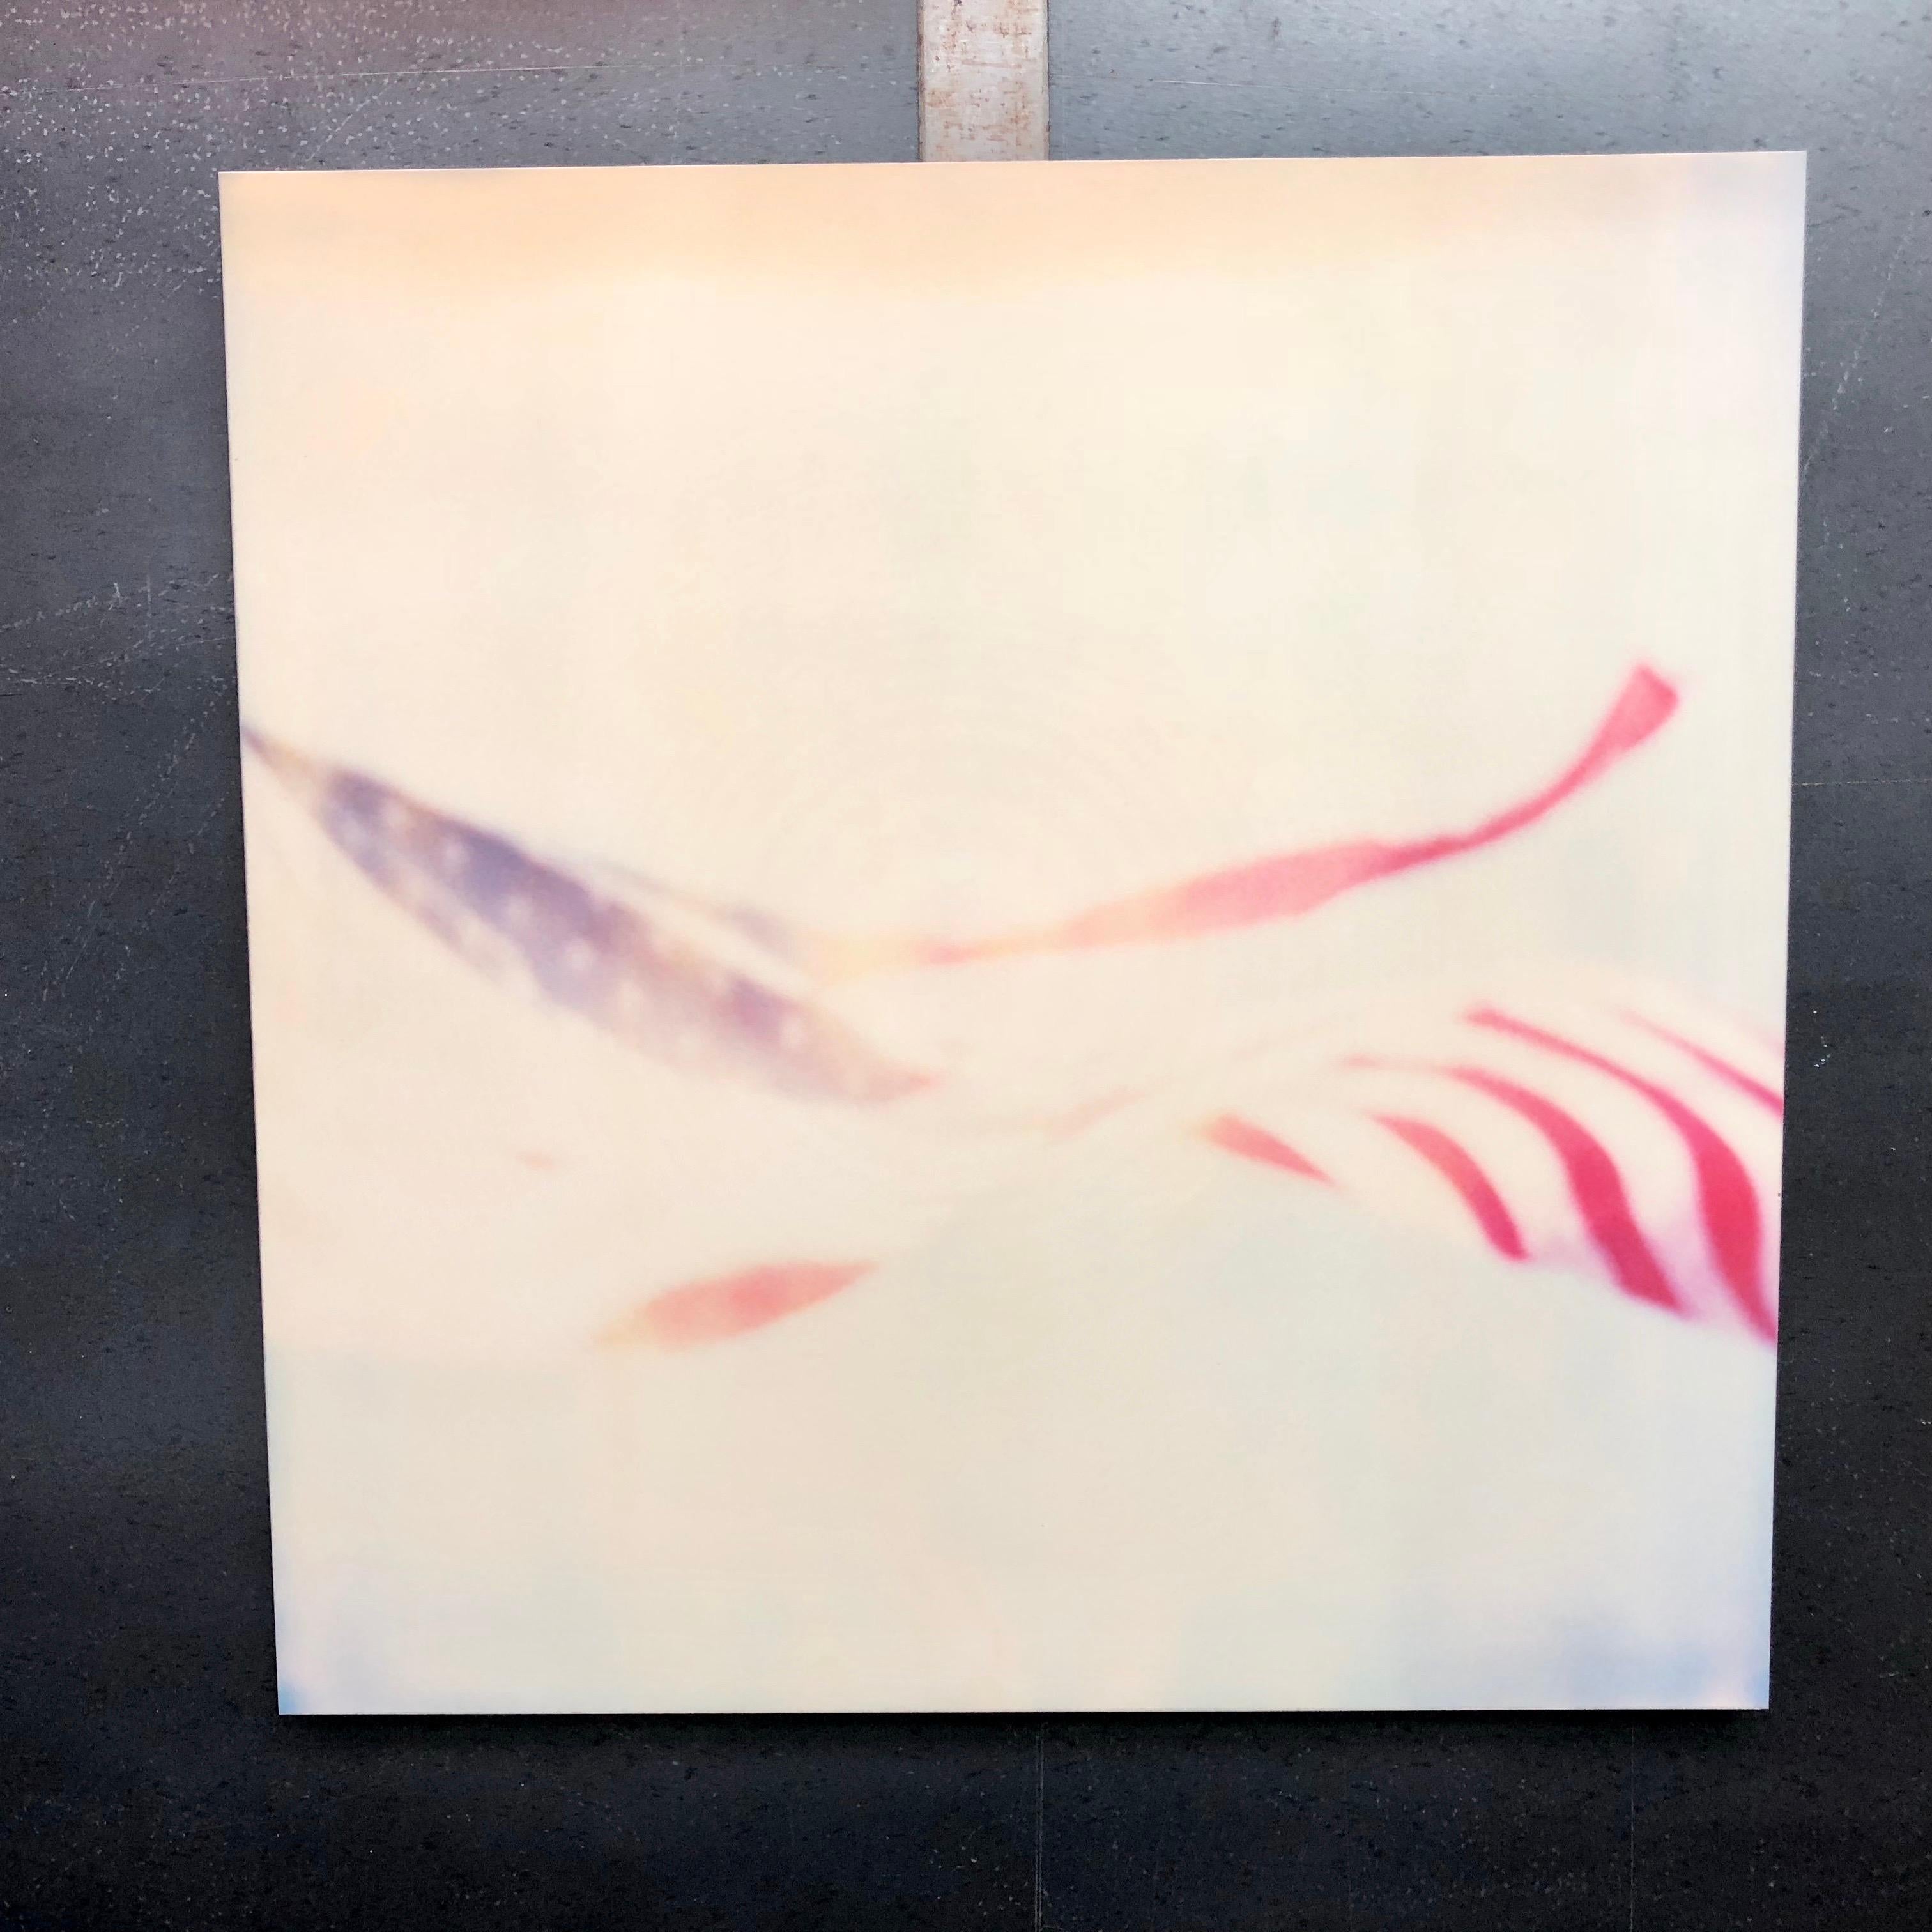 Primary Colors - Contemporary, Abstract, Landscape, USA, Polaroid, Flag - Photograph by Stefanie Schneider